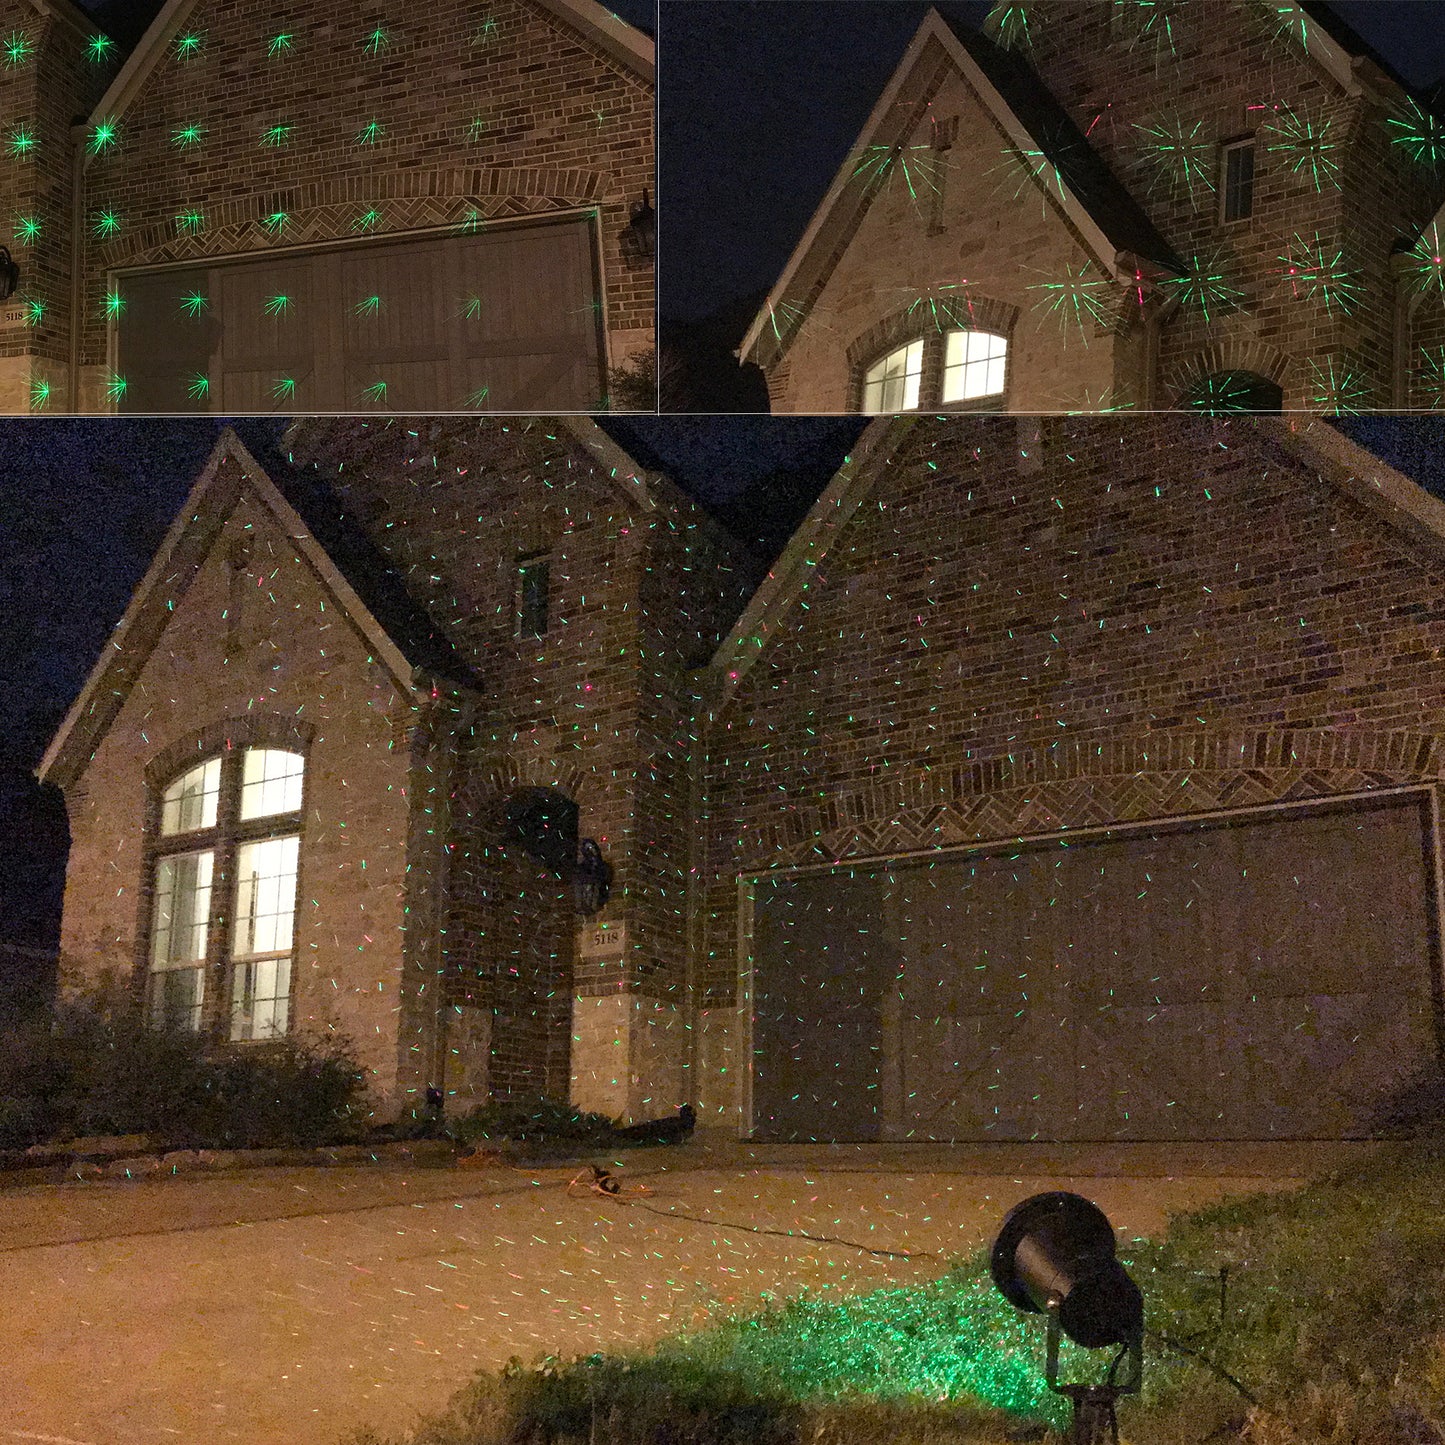 Allgala Christmas Garden Laser Light Project for Indoor and Outdoor